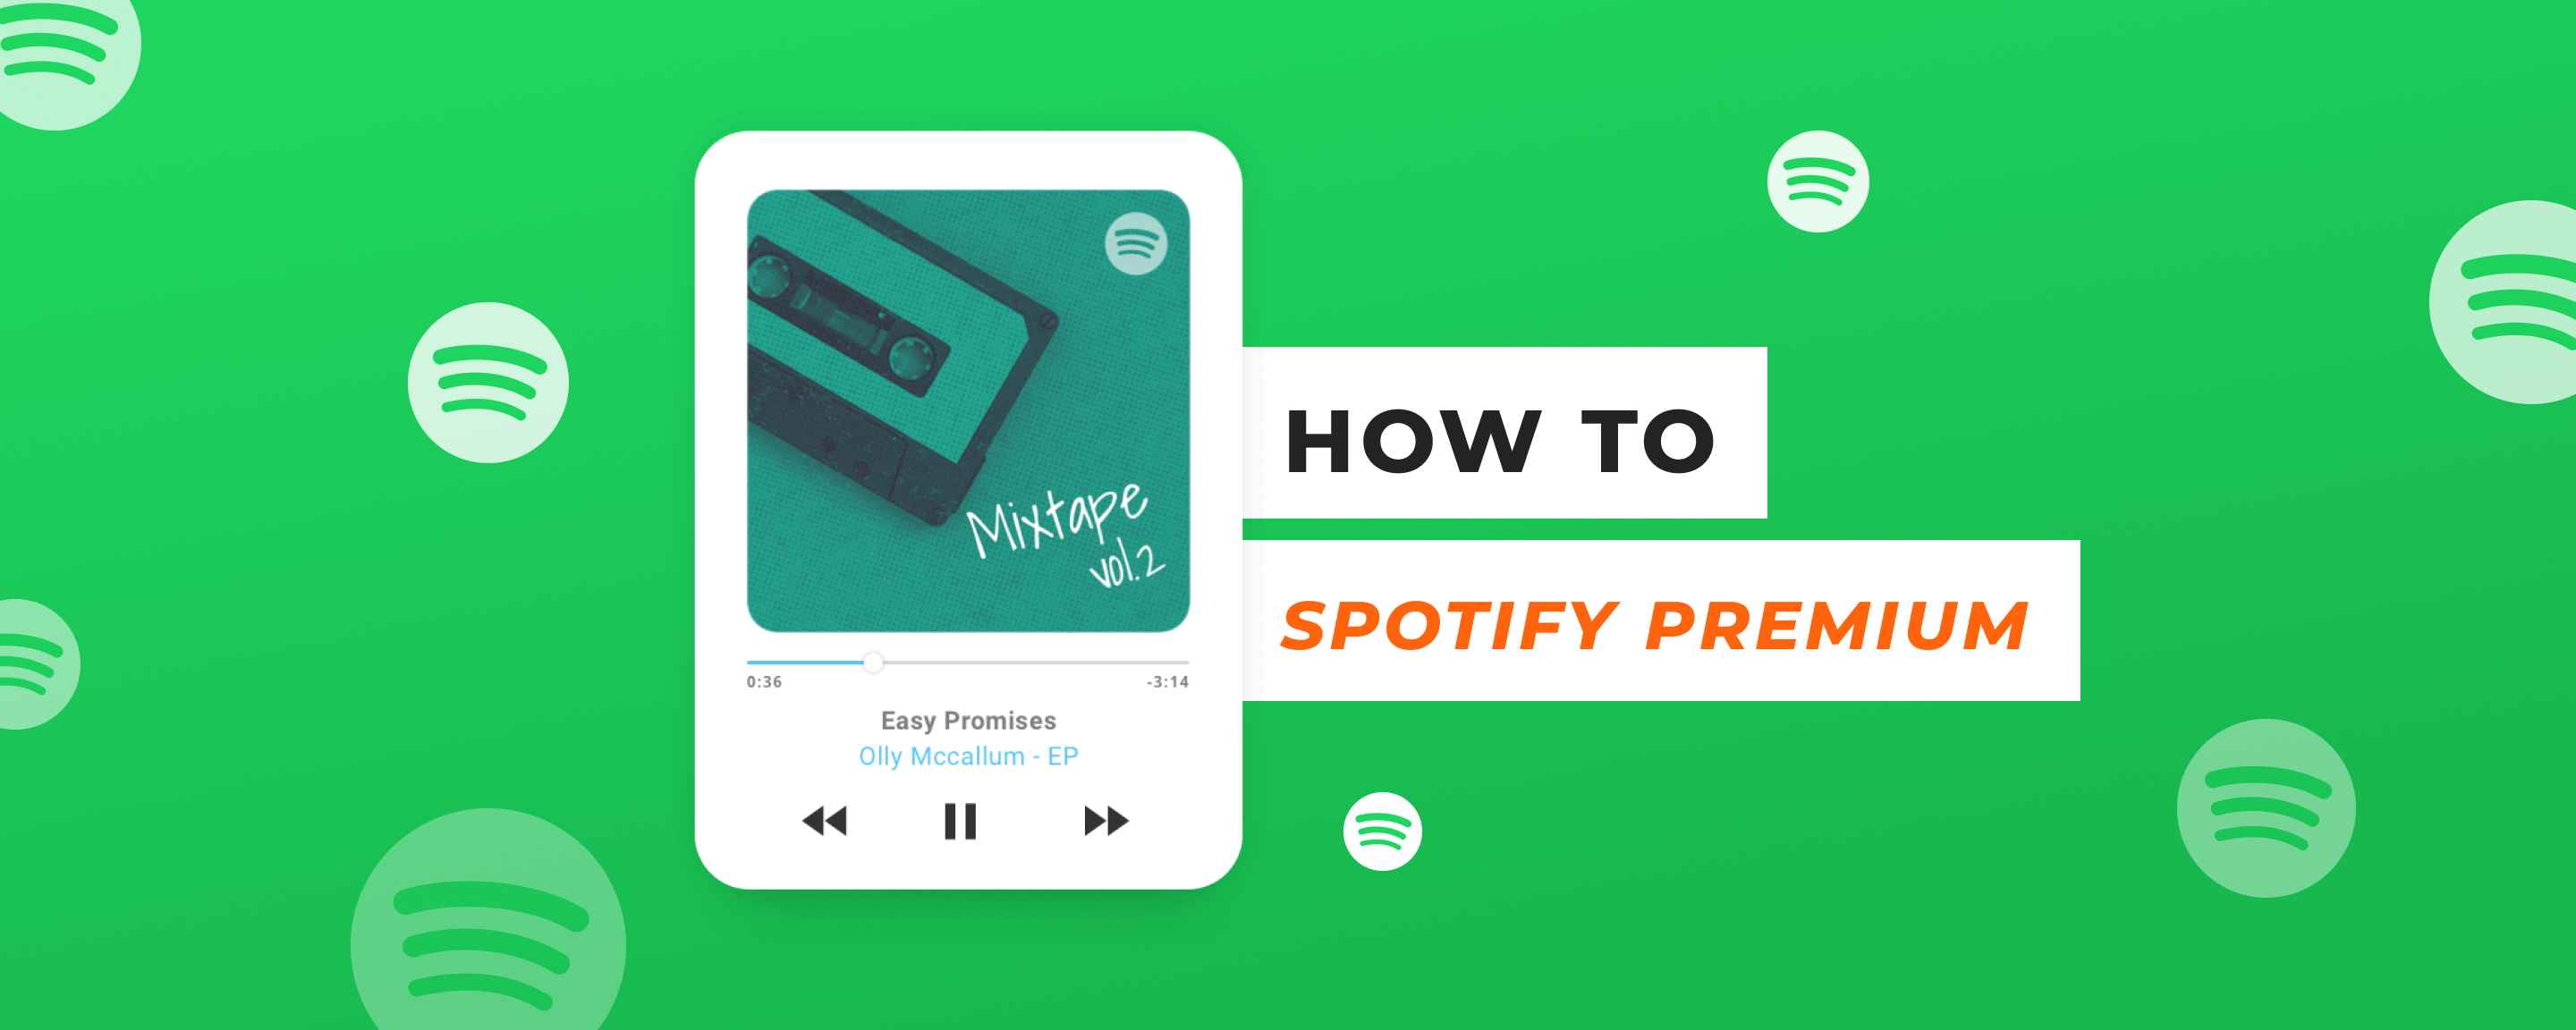 how to use spotify premium in a discord server